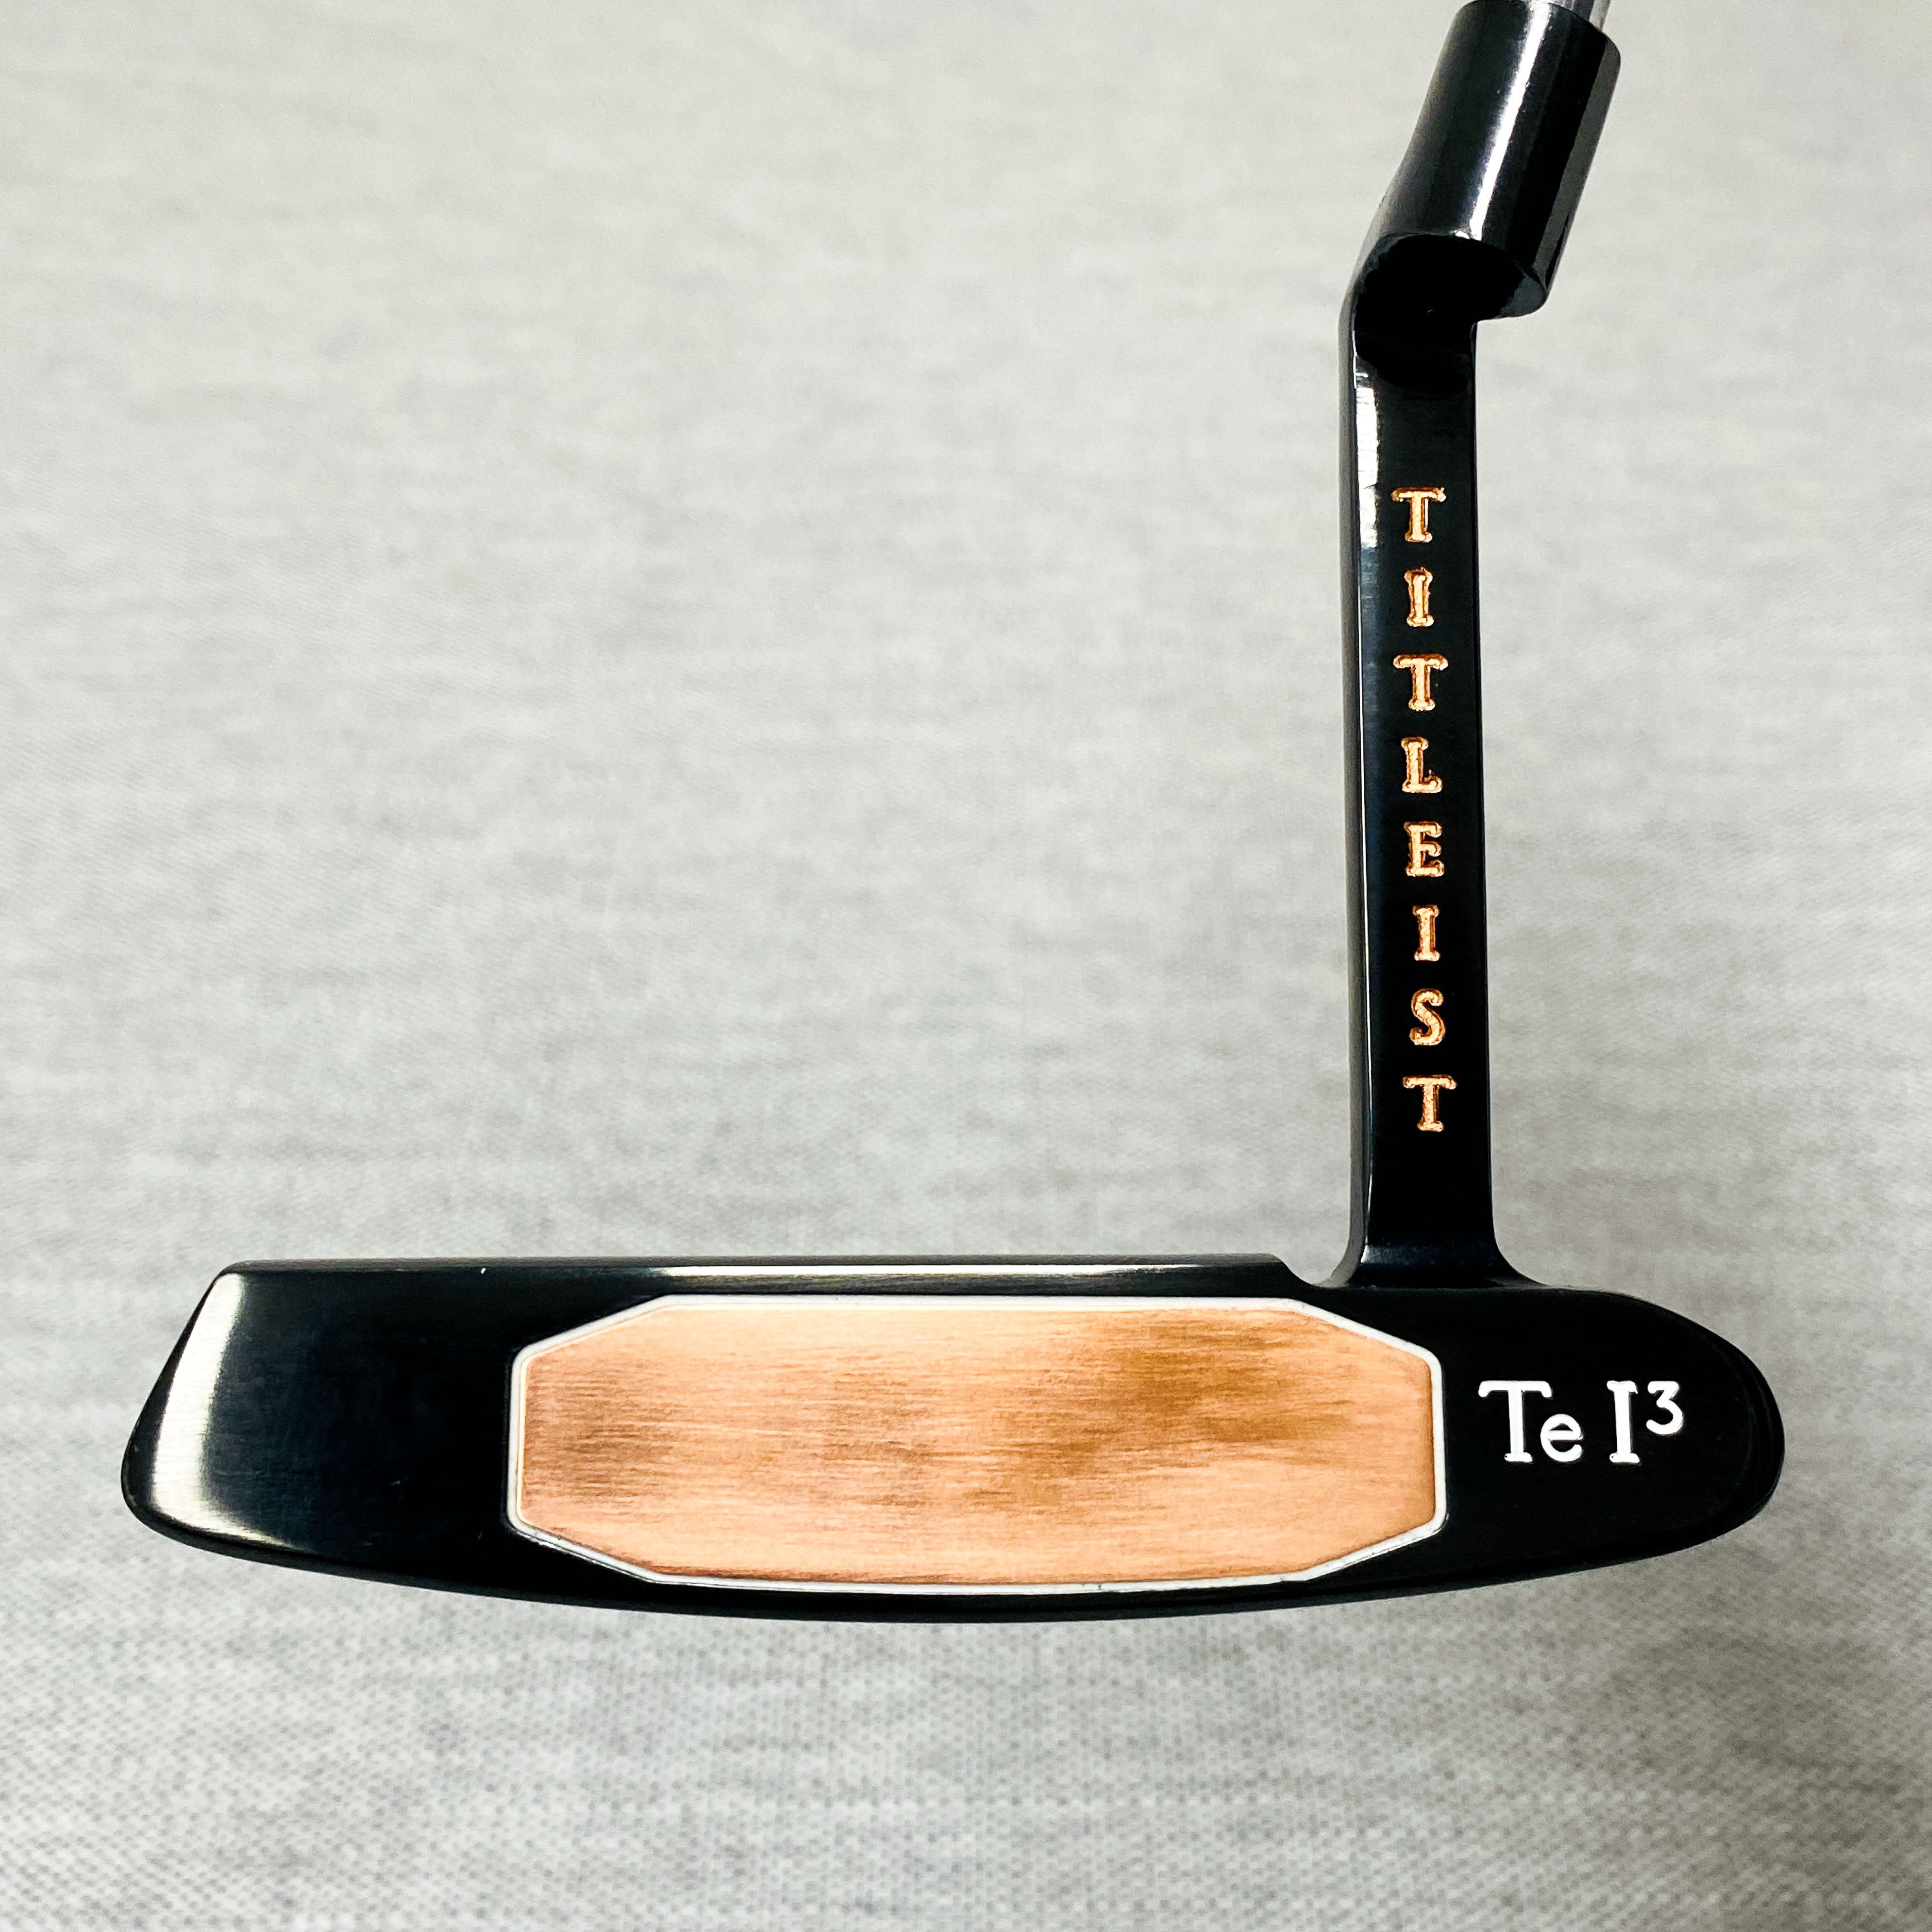 Scotty Cameron 2000 Tei3 Newport Long-Neck Putter. Refinished in 